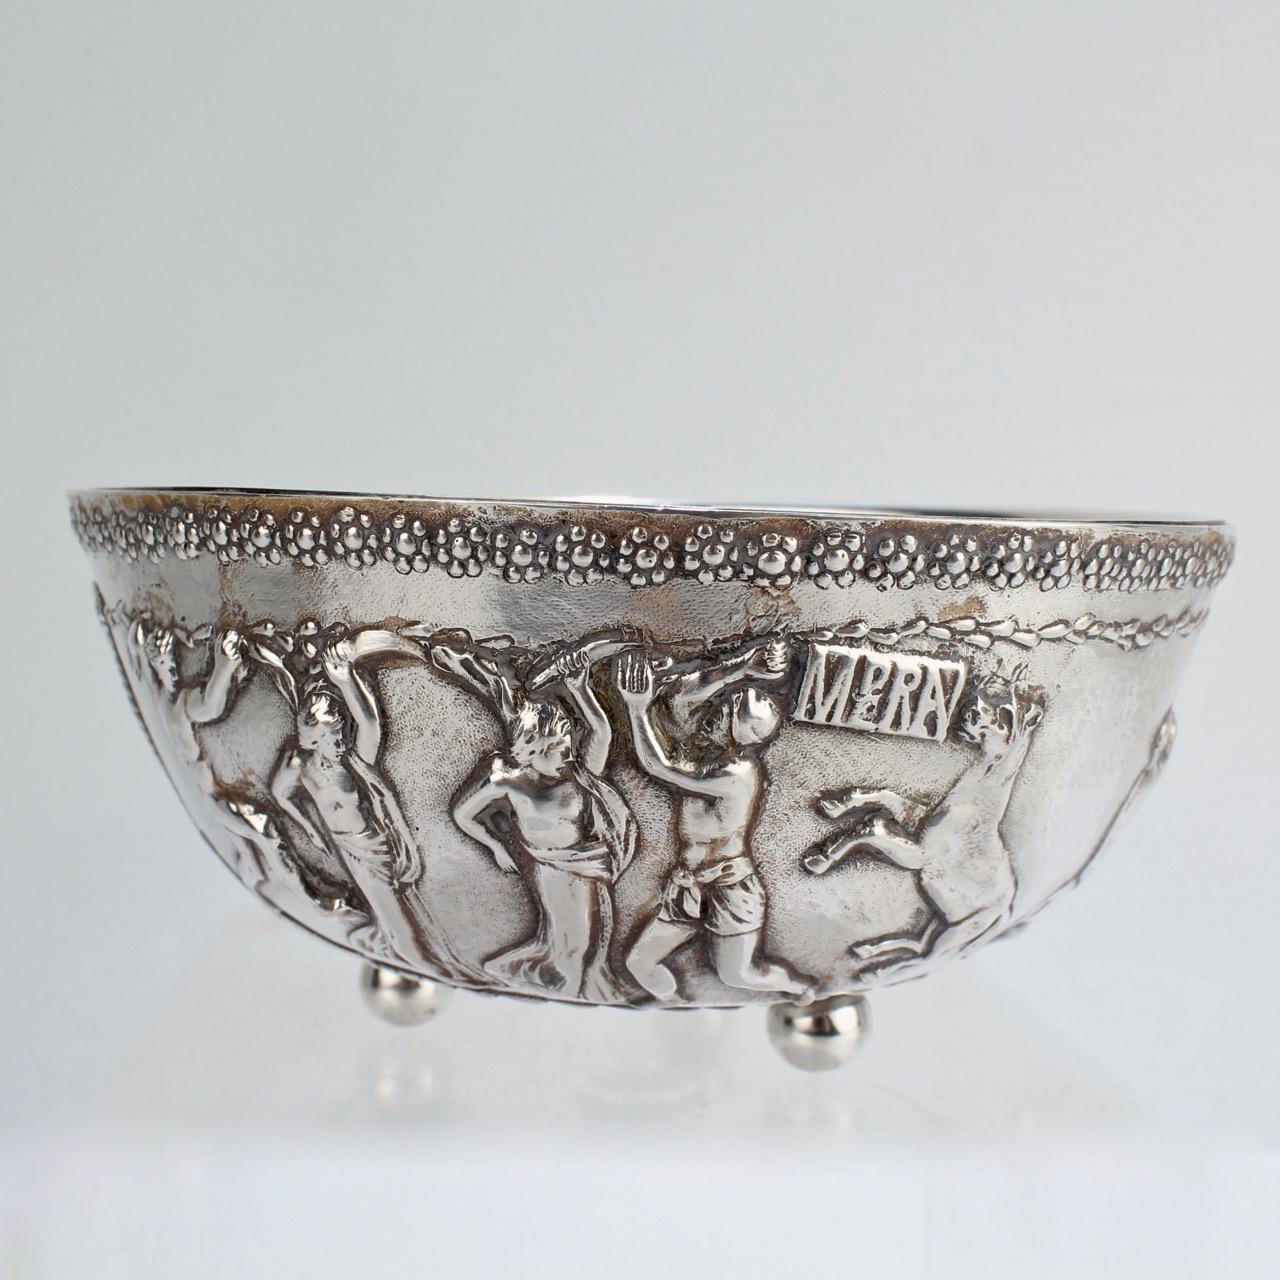 A wonderful Roman Revival bowl by E F Caldwell, one New York's most important historical design firm.

The bowl has a raised frieze-like decoration around it's circumference, rosettes to the top rim and rests on 3 ball feet.

It would serve as a